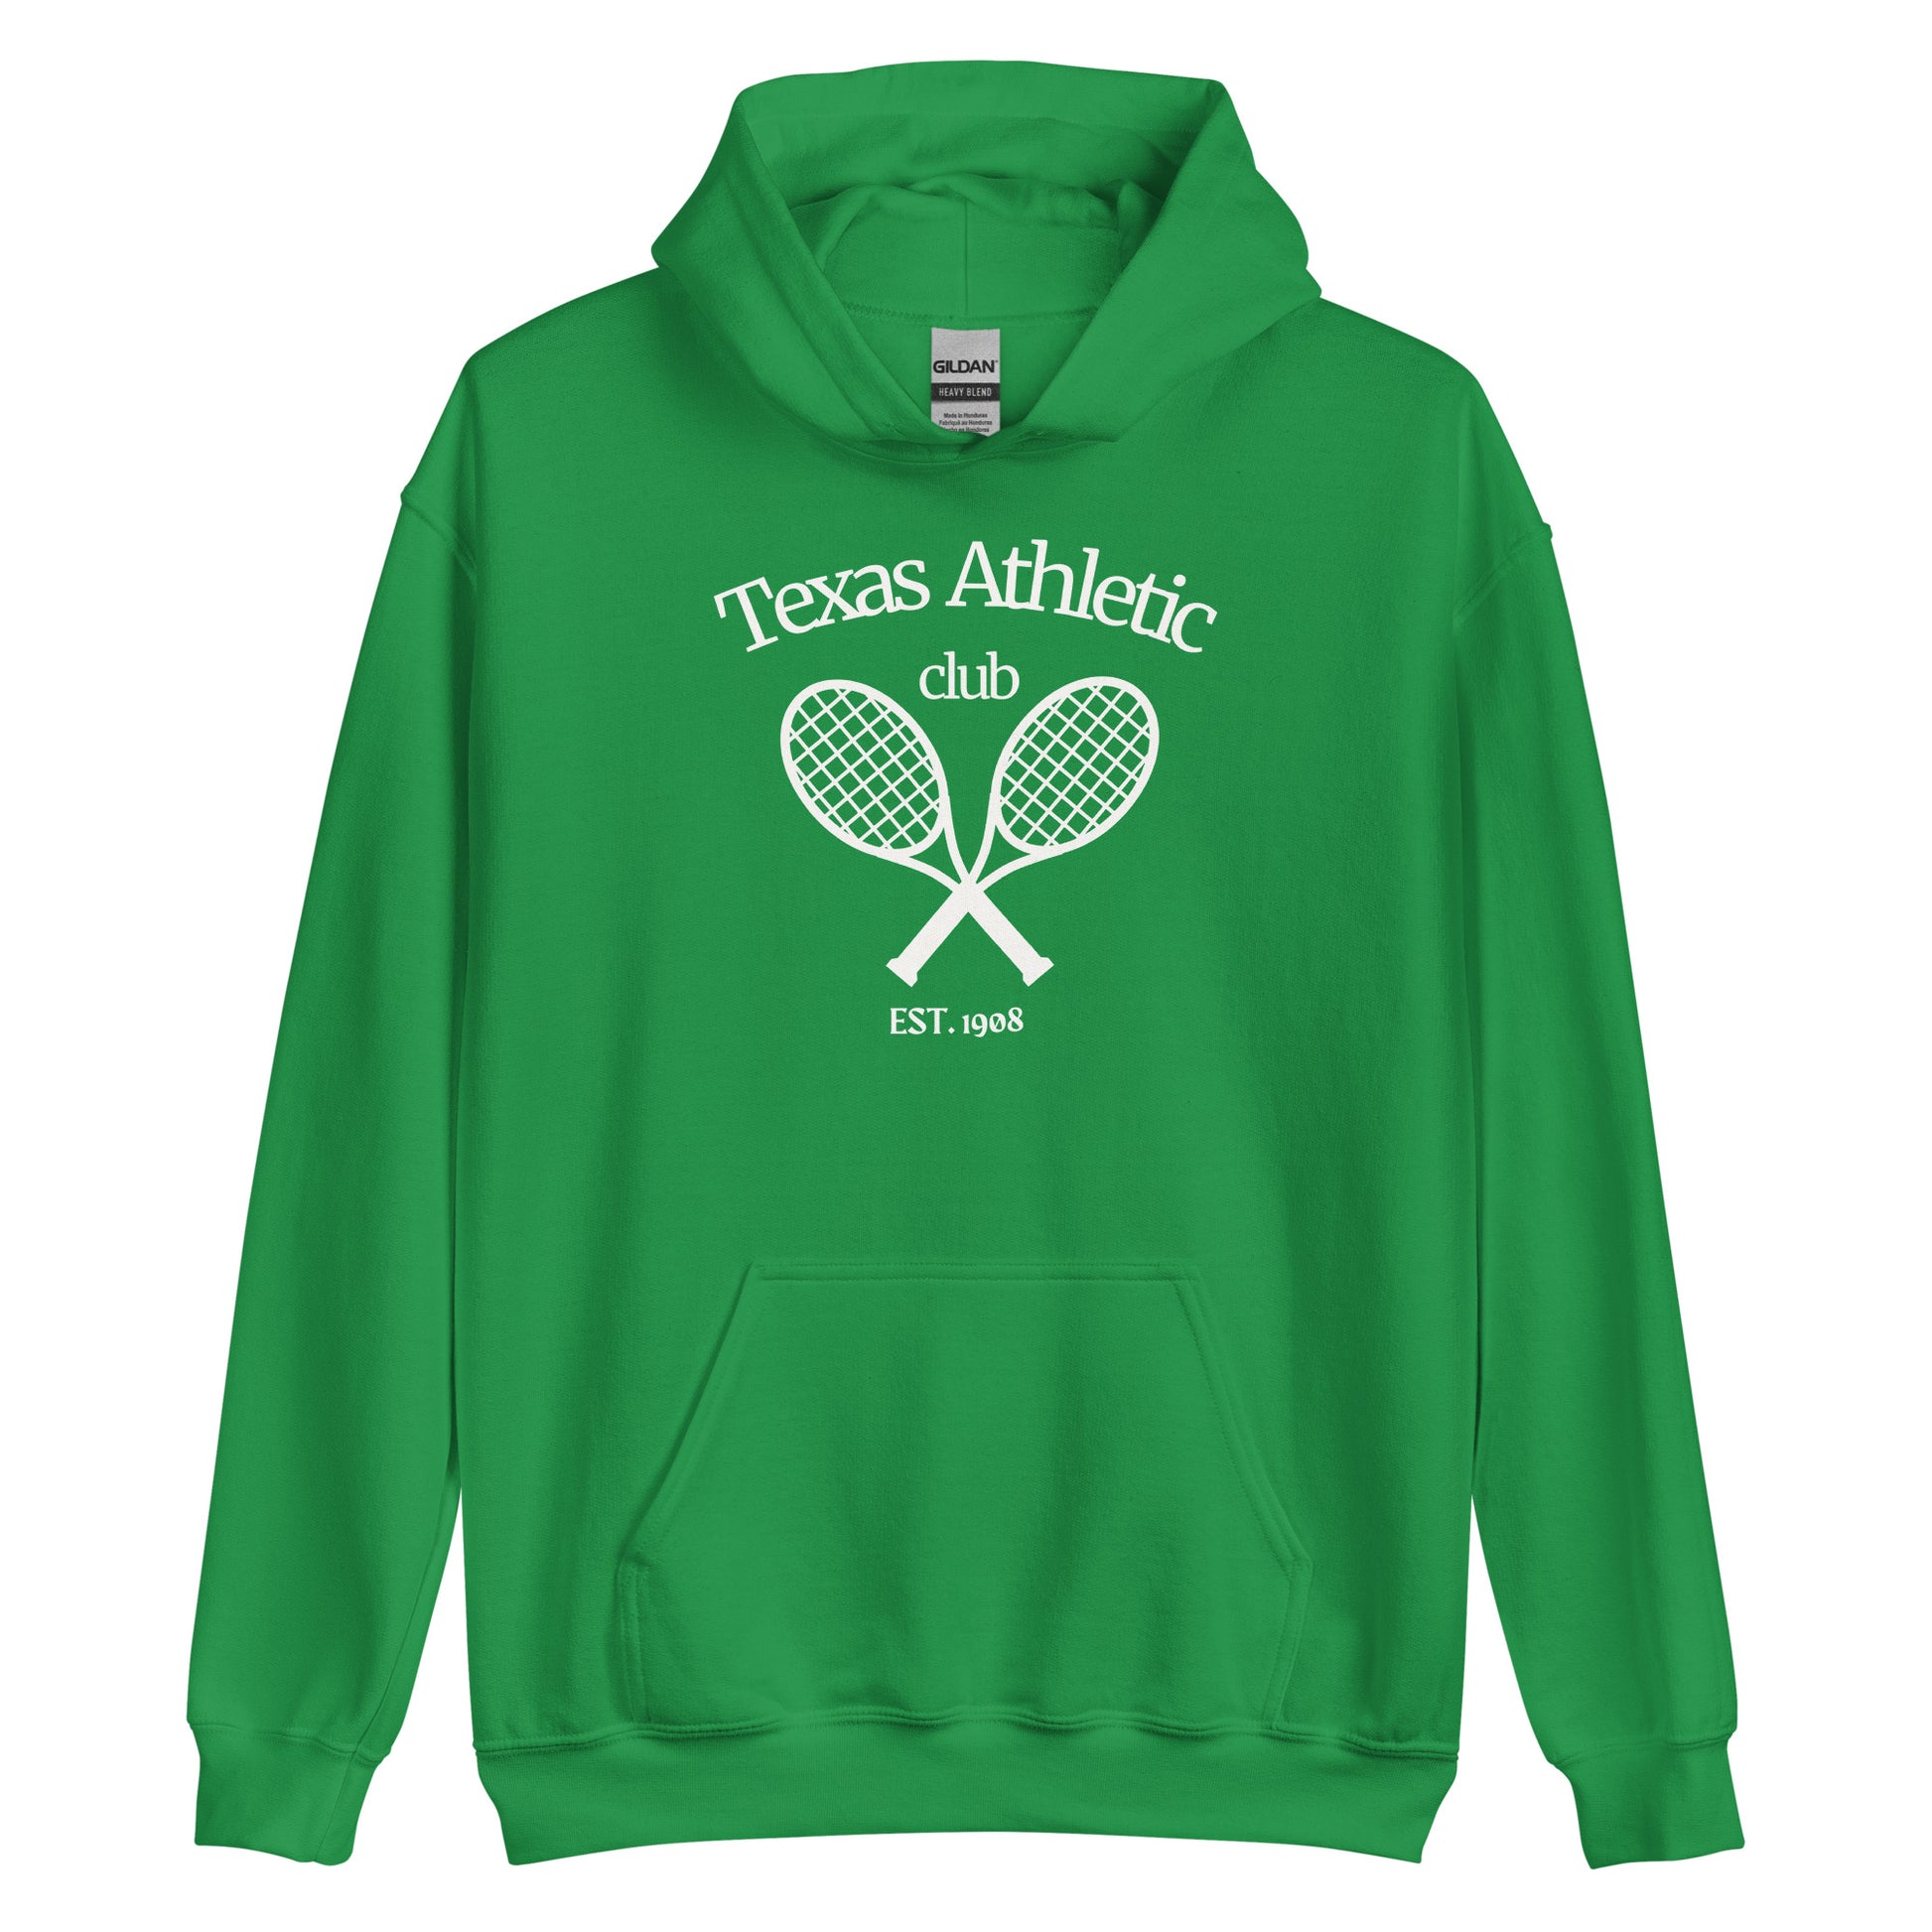 Kelly Green hoodie with white 'Texas Athletic Club' text and crossed tennis rackets graphic, front pouch pocket, ribbed cuffs and hem, displayed on a plain background.